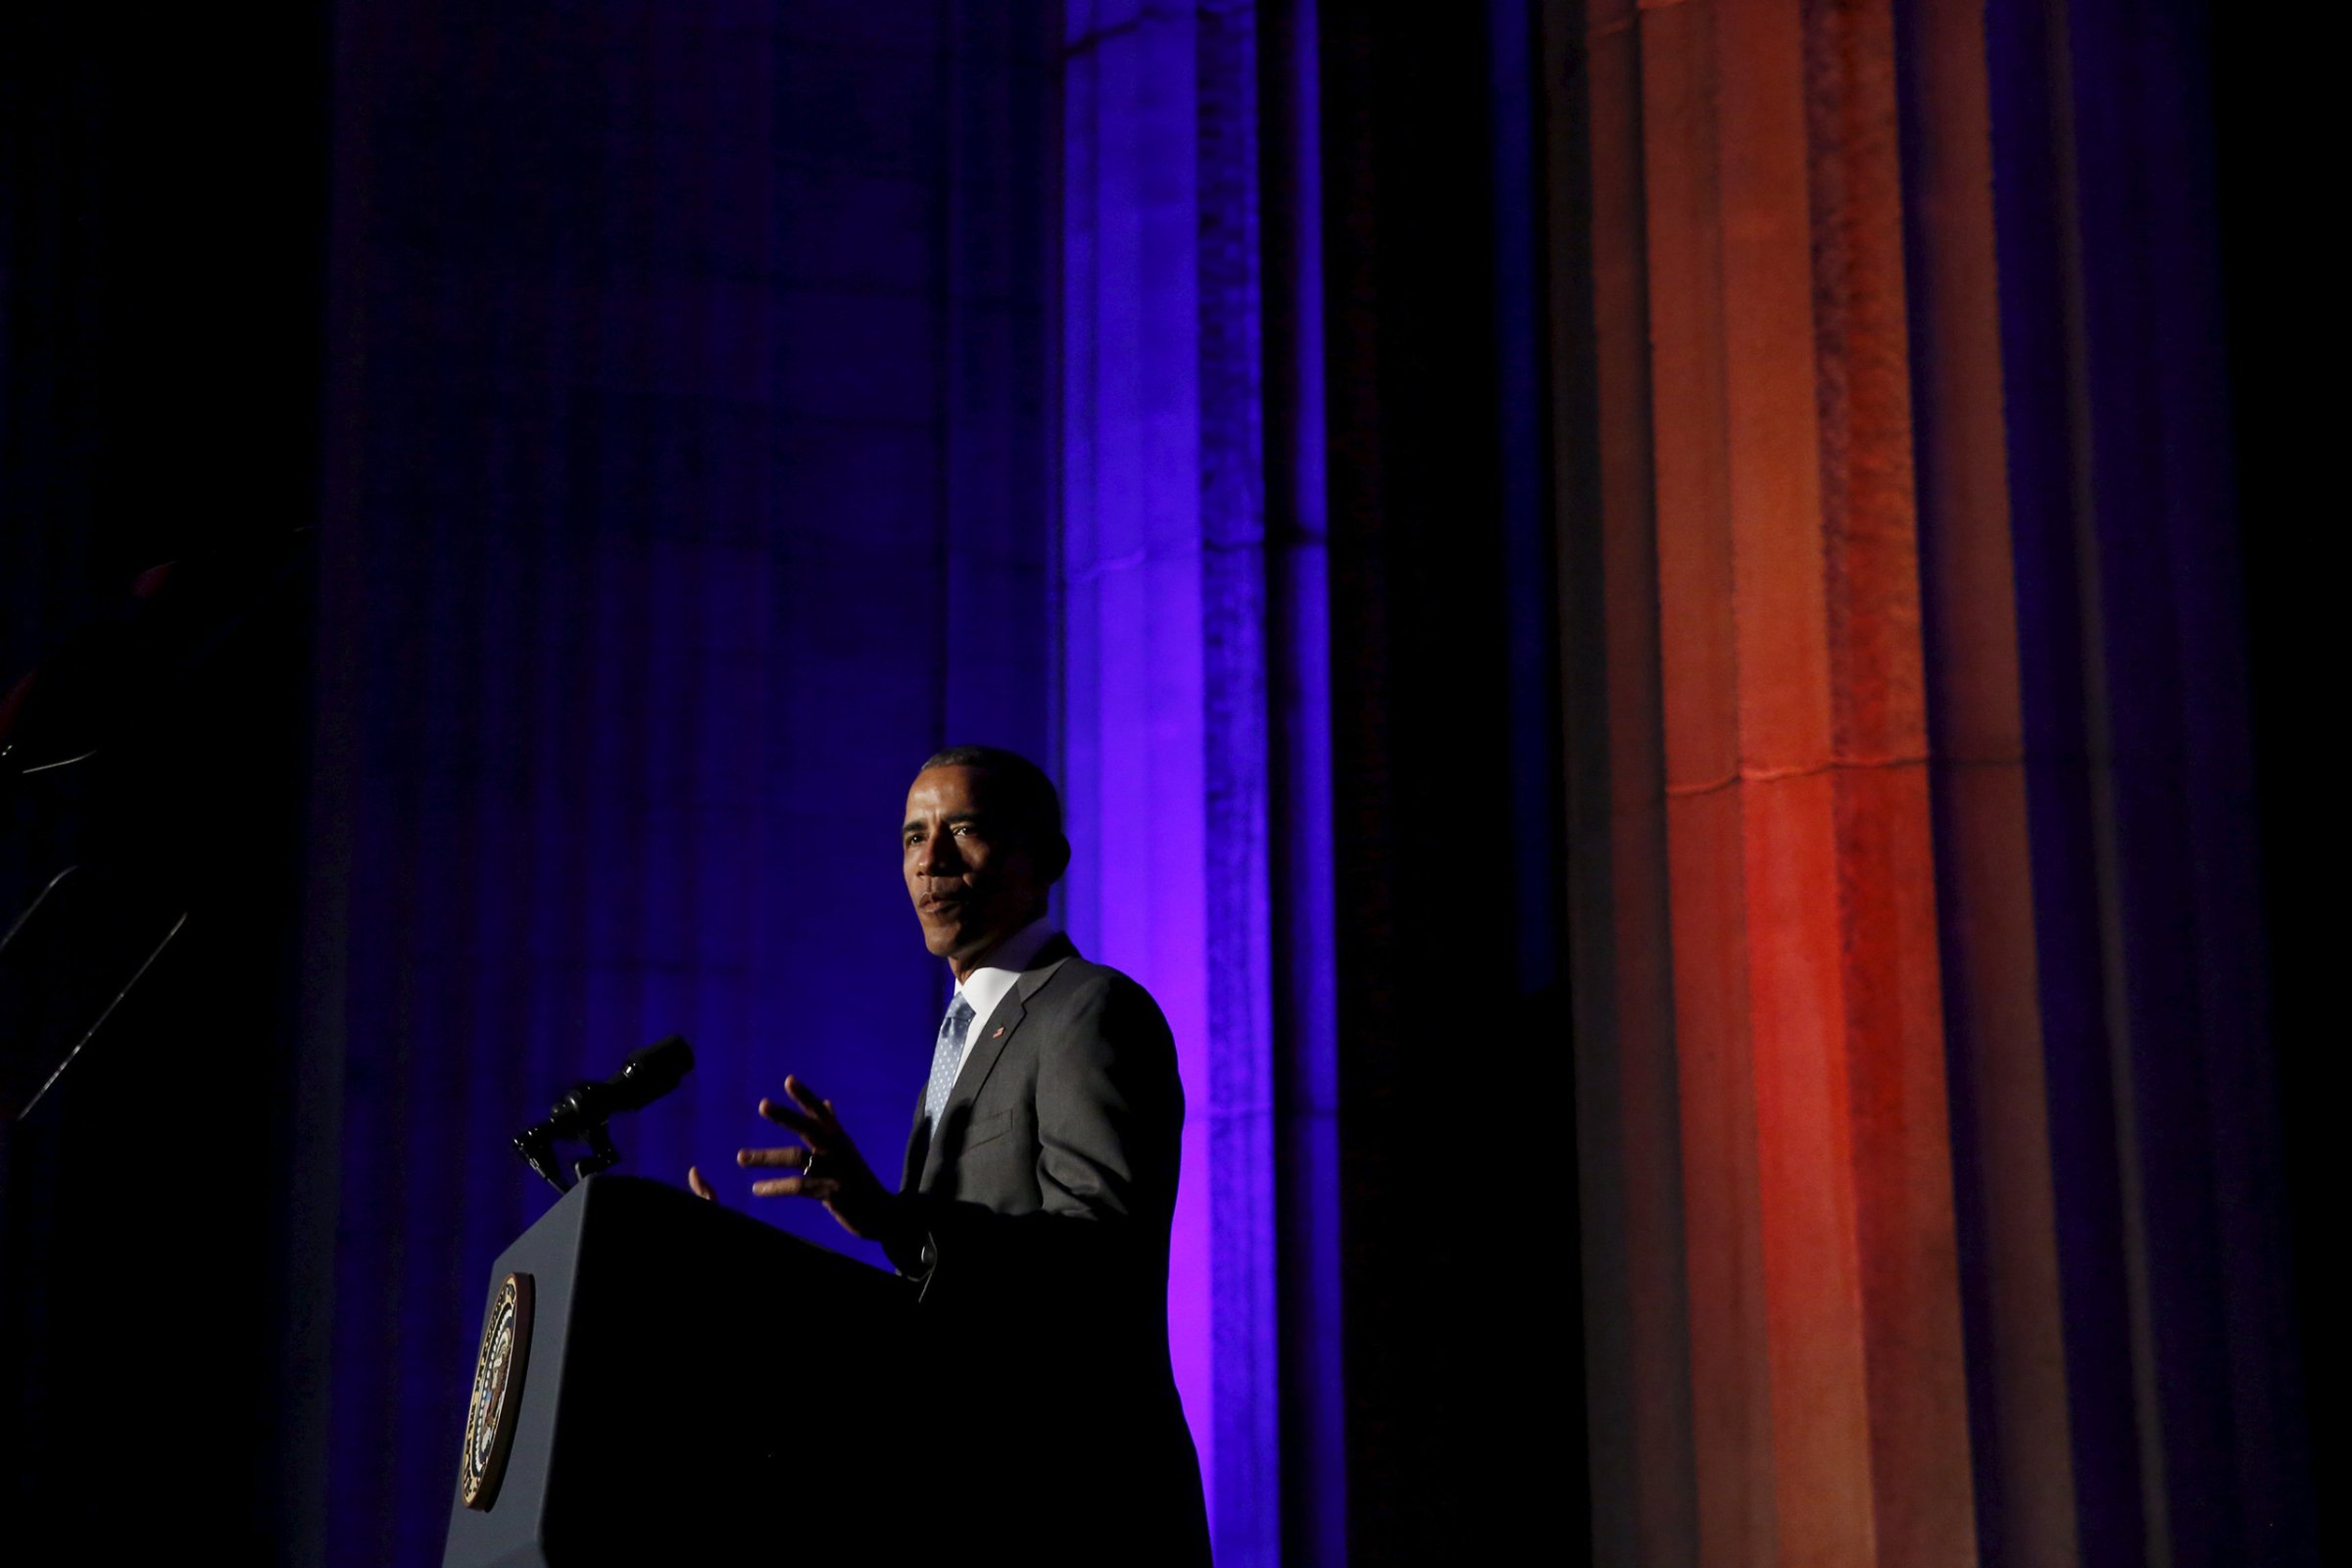 U.S. President Barack Obama delivers the keynote address at the awards dinner for Syracuse University's Toner Prize for Excellence in Political Reporting at the Andrew W. Mellon Auditorium in Washington March 28, 2016. REUTERS/Yuri Gripas